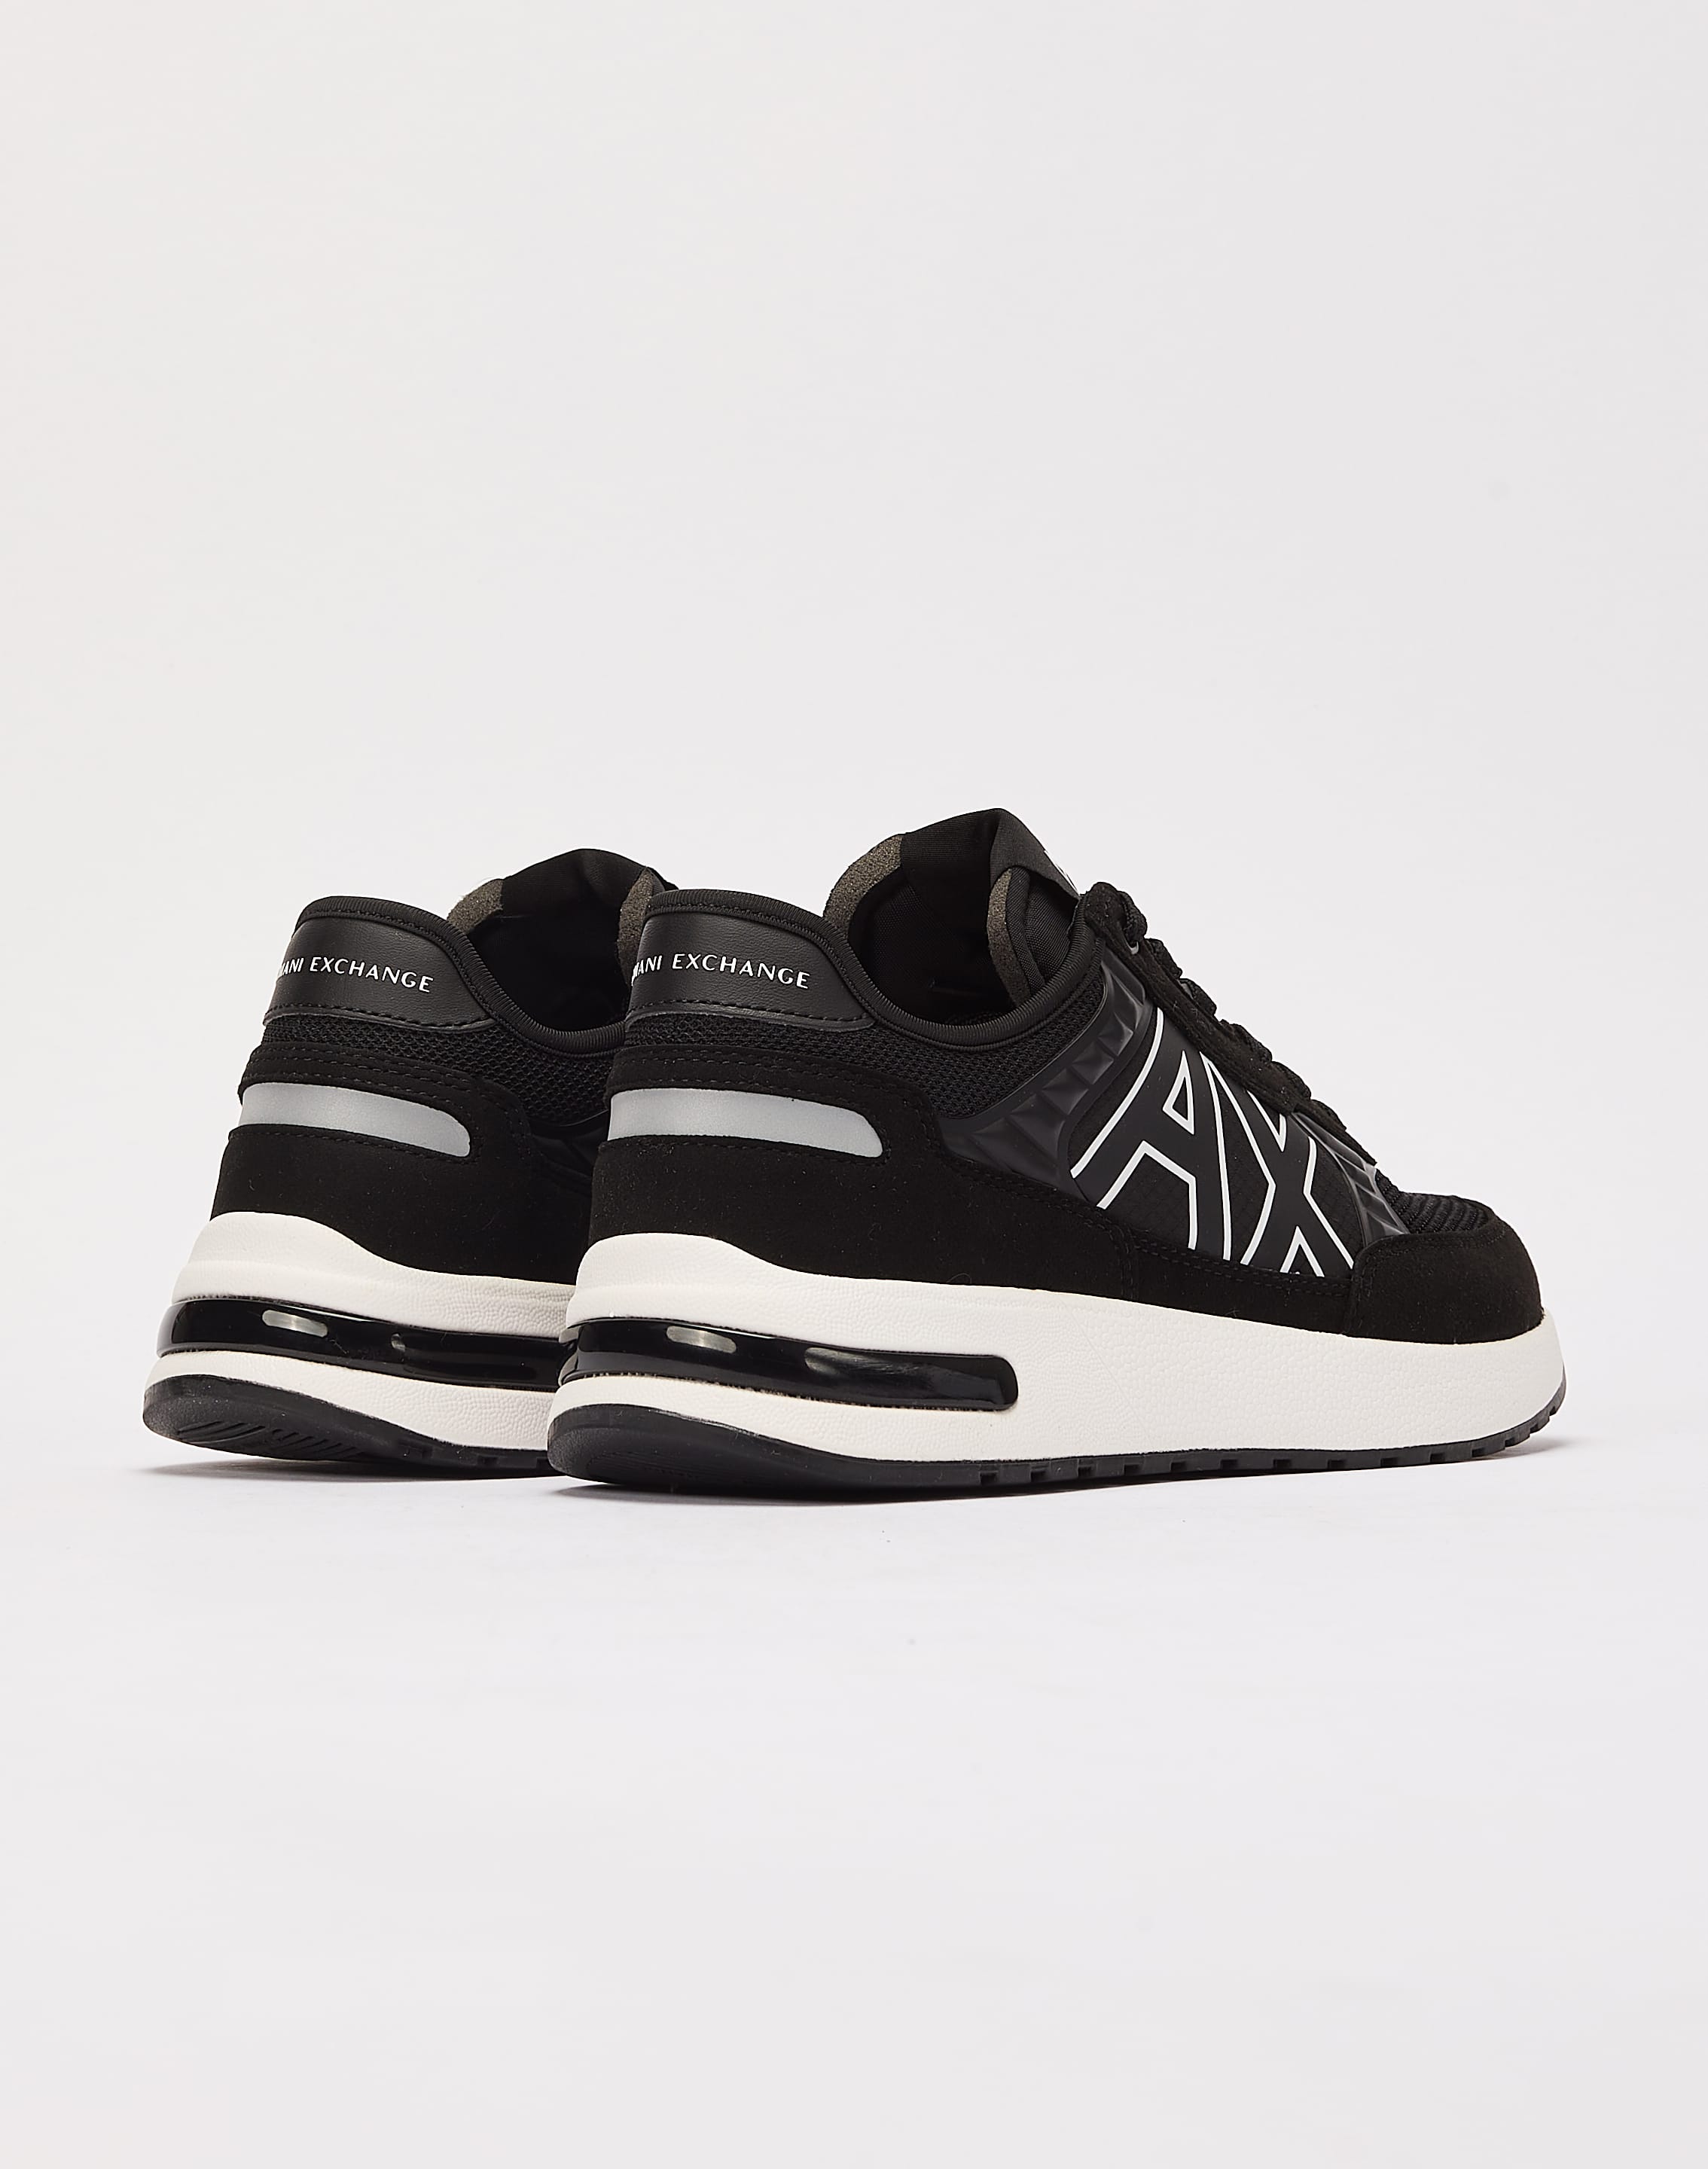 Buy Armani Exchange Women's Low-Top Sneakers, Multicolour White Black D611,  6 us at Amazon.in